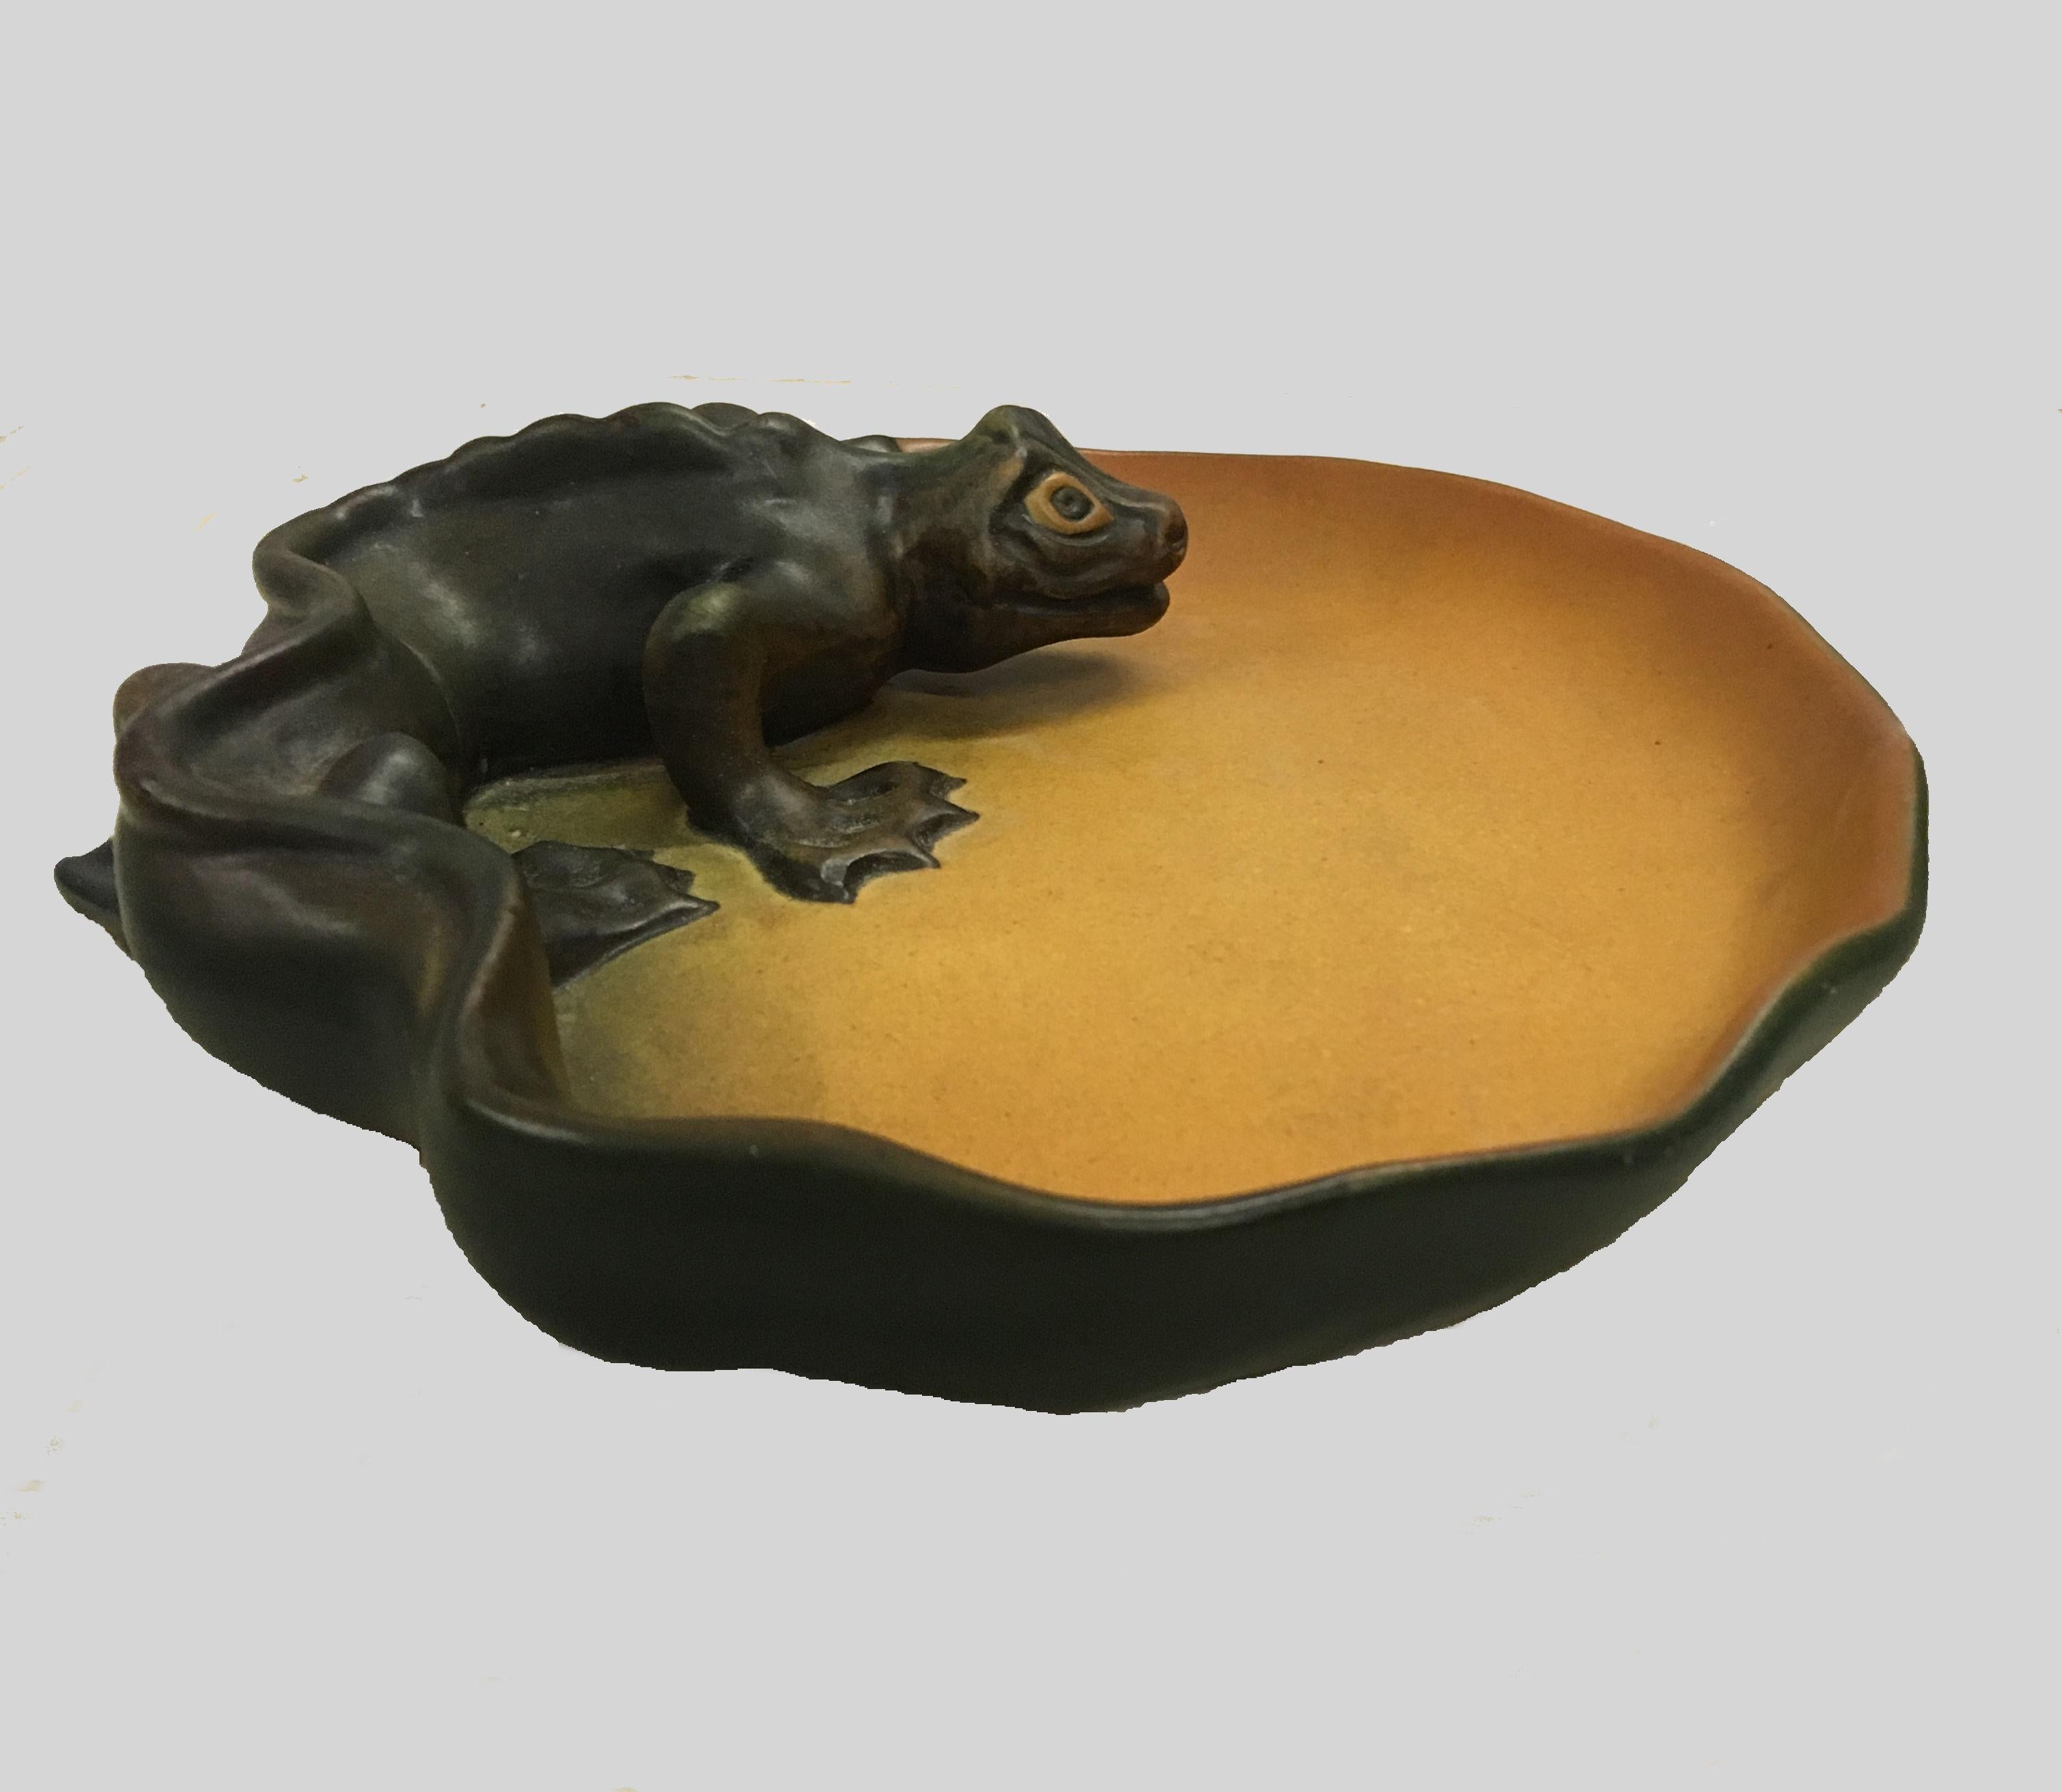 1900's Hand-Crafted Danish Art Nouveau Lizard Ash Tray / Bowl by P. Ibsens Enke In Good Condition For Sale In Knebel, DK